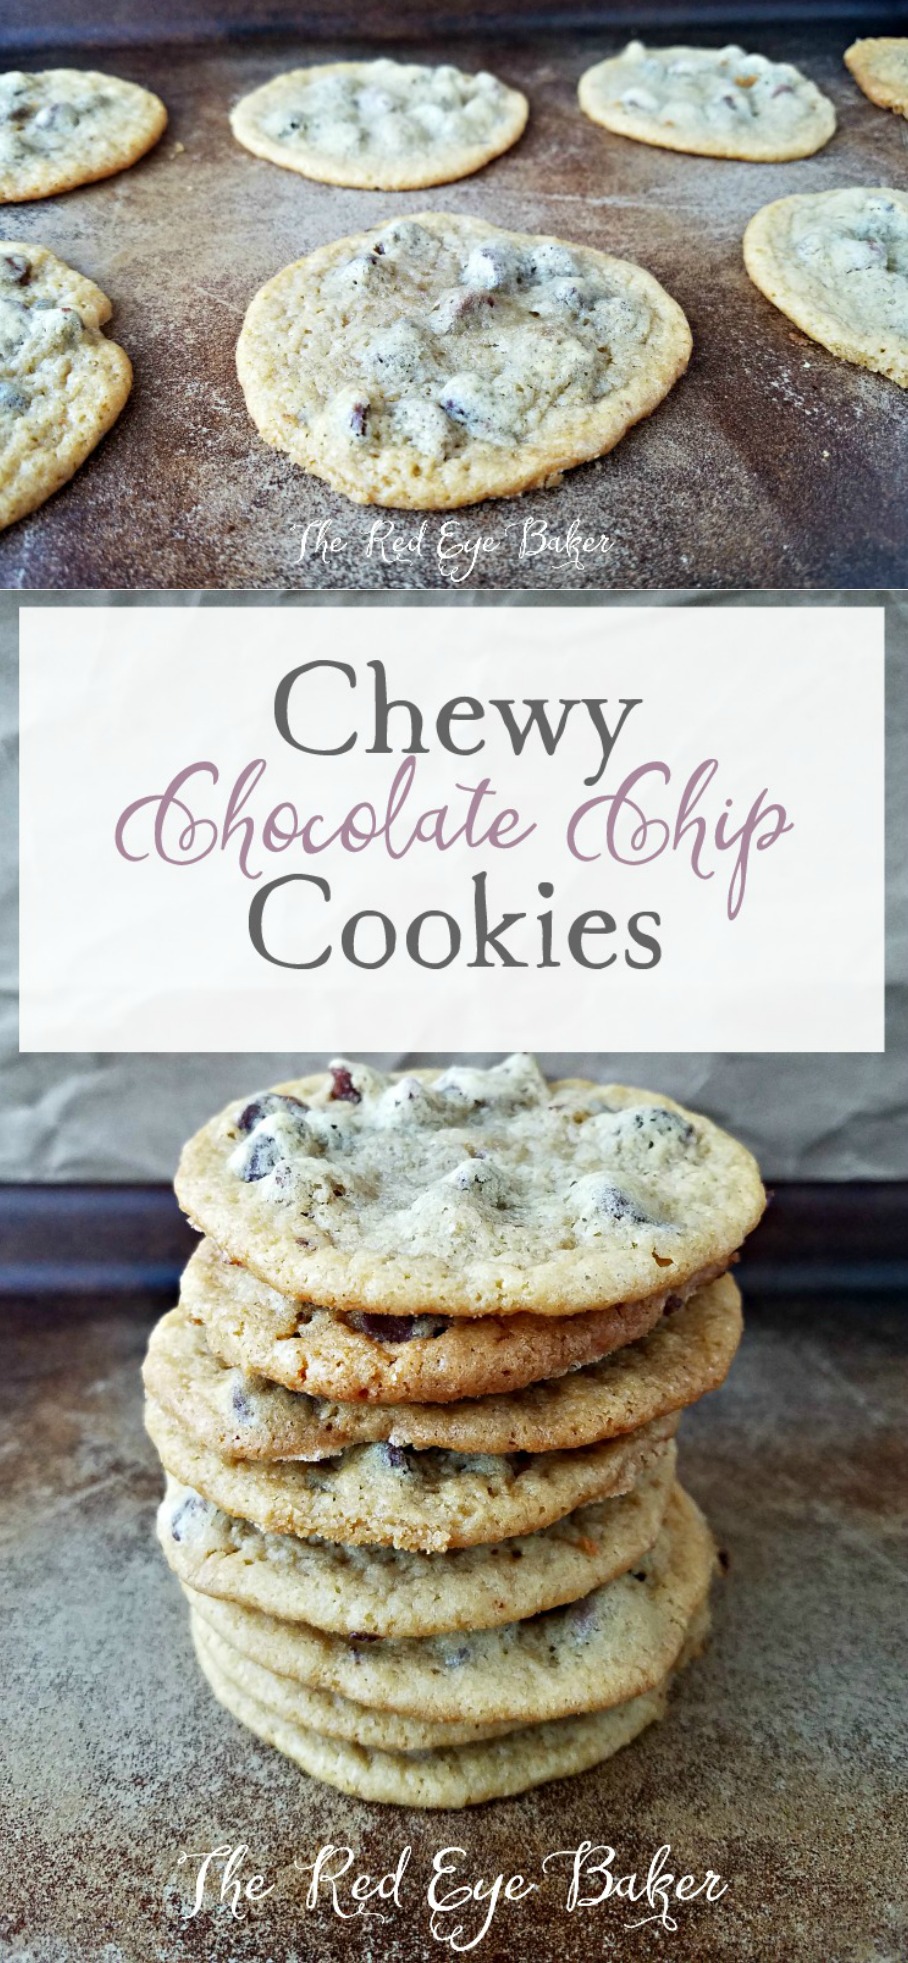 Chewy Chocolate Chip Cookies | Is there anything better than an ooey, gooey, cookie? These Chewy Chocolate Chip Cookies are sure to please the cookie monster in your life.